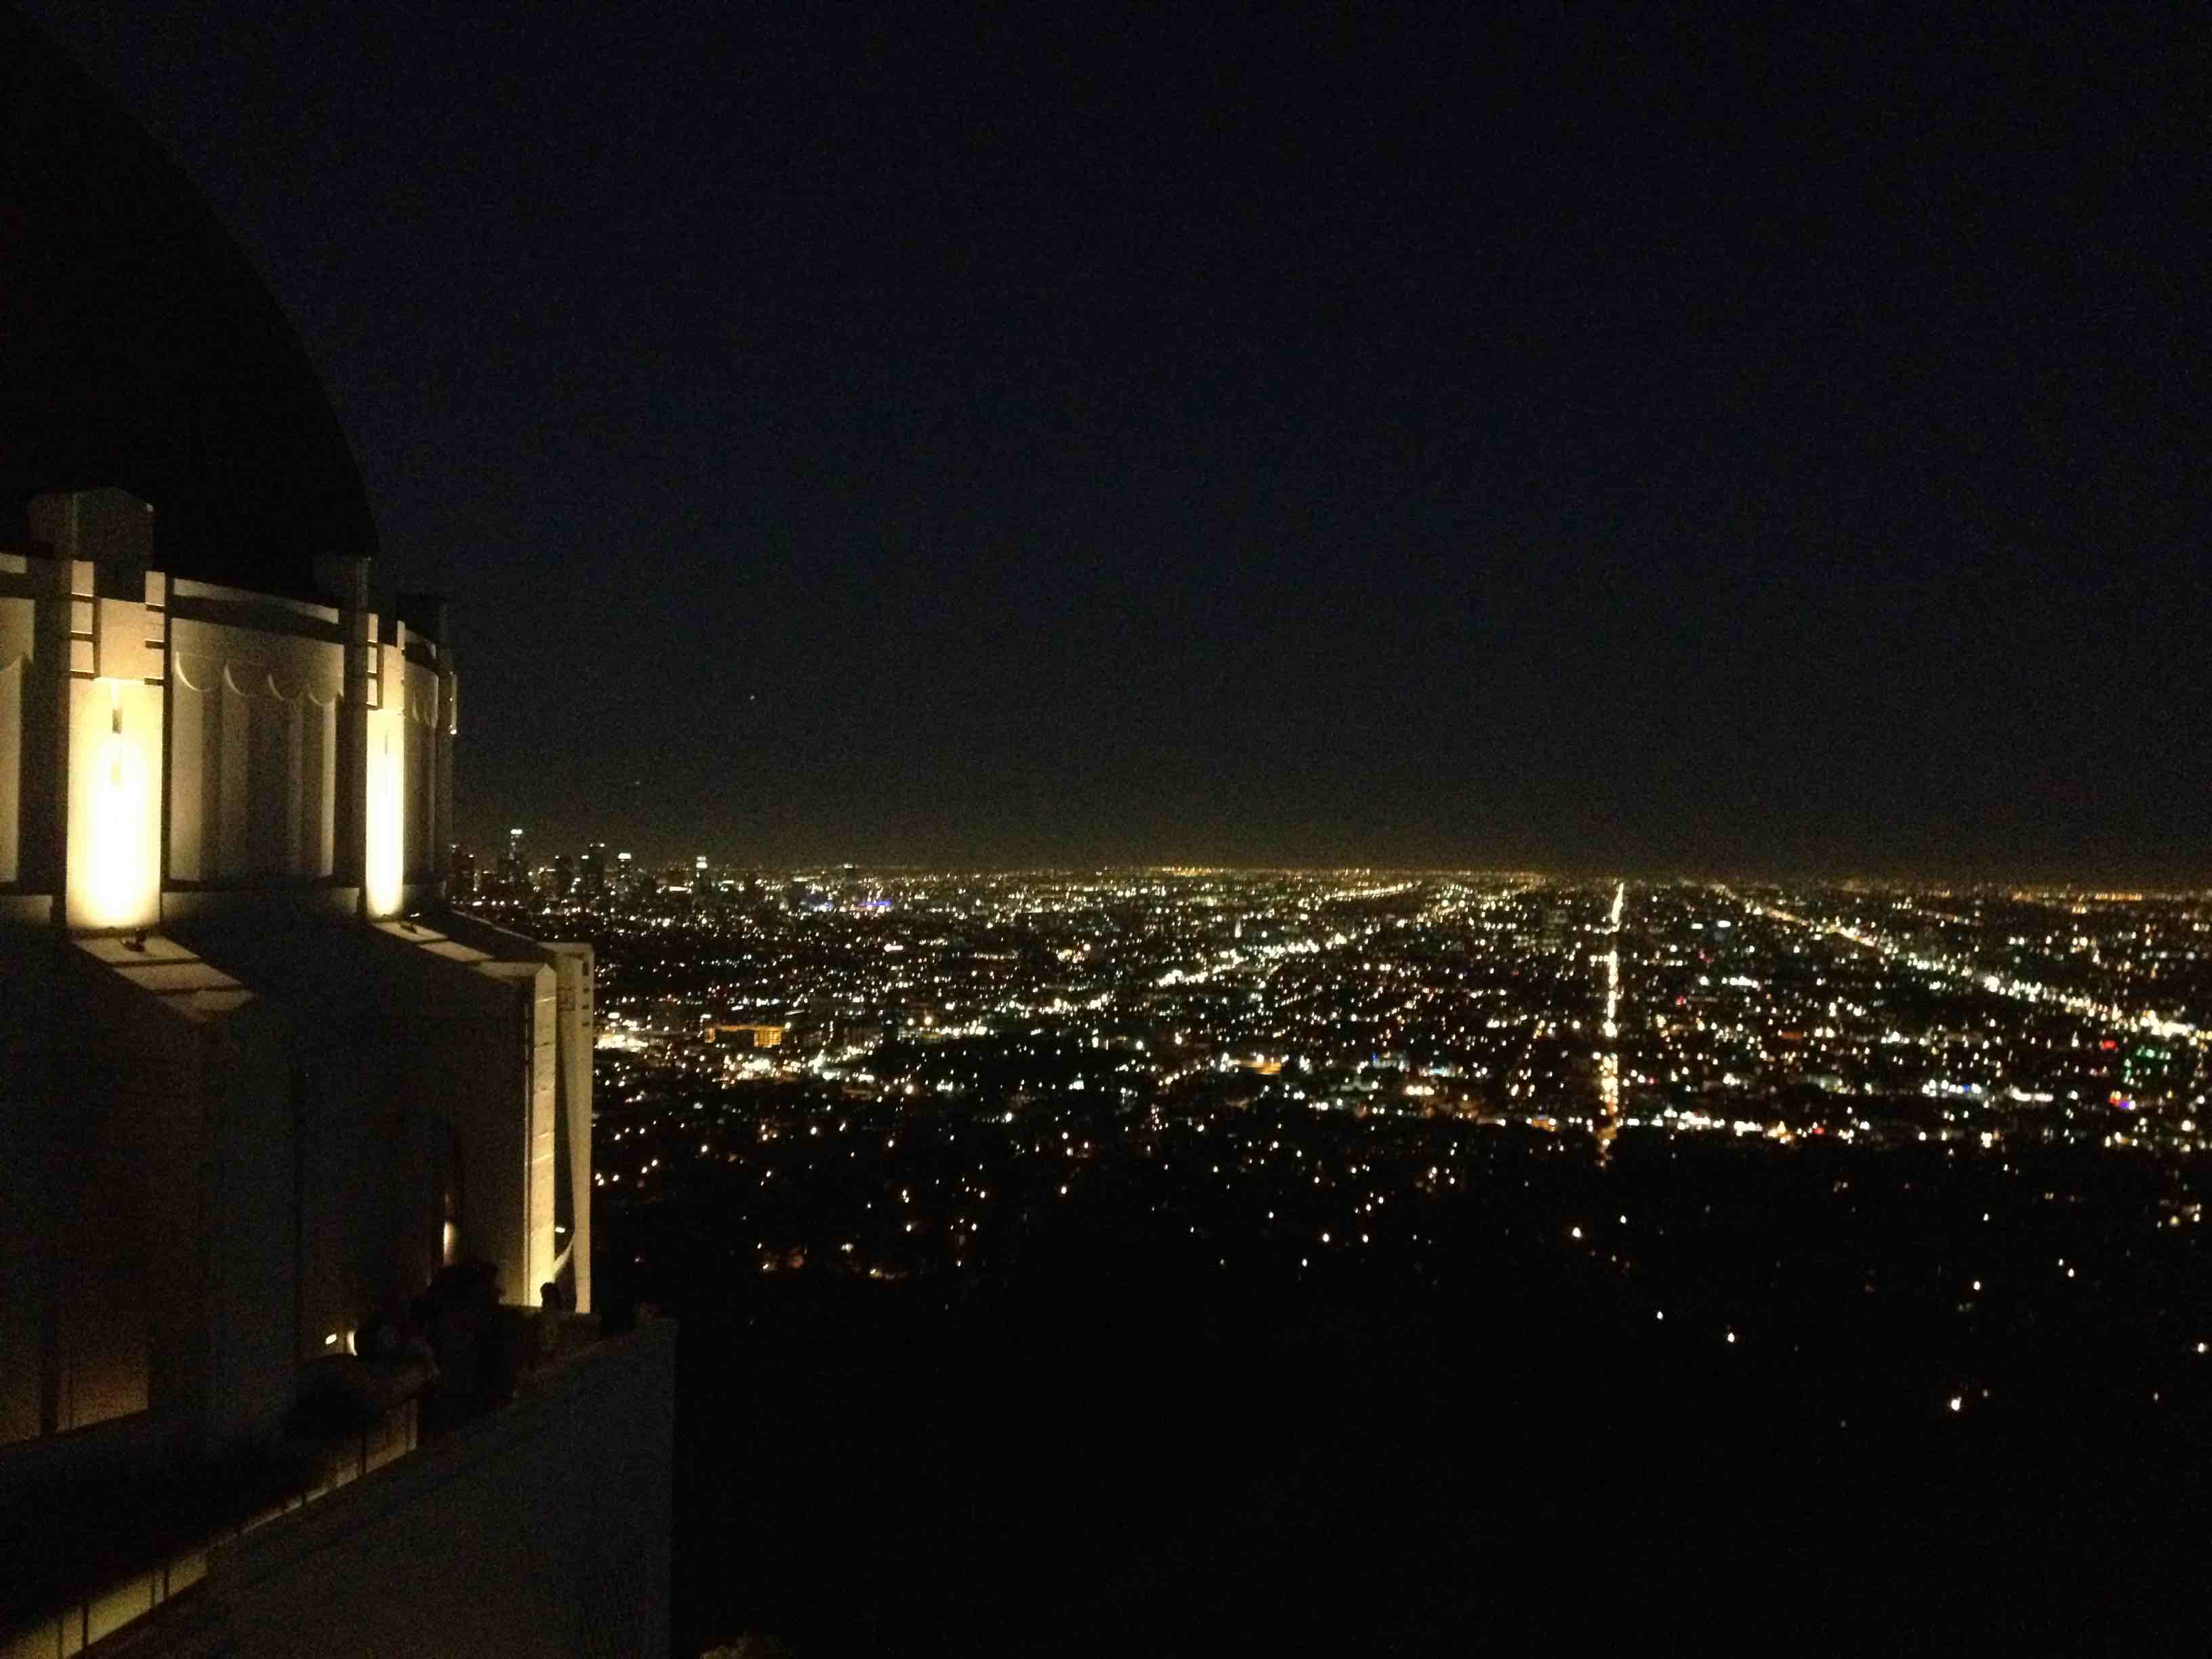 View out over Los Angeles at night from the Griffith Park Observatory